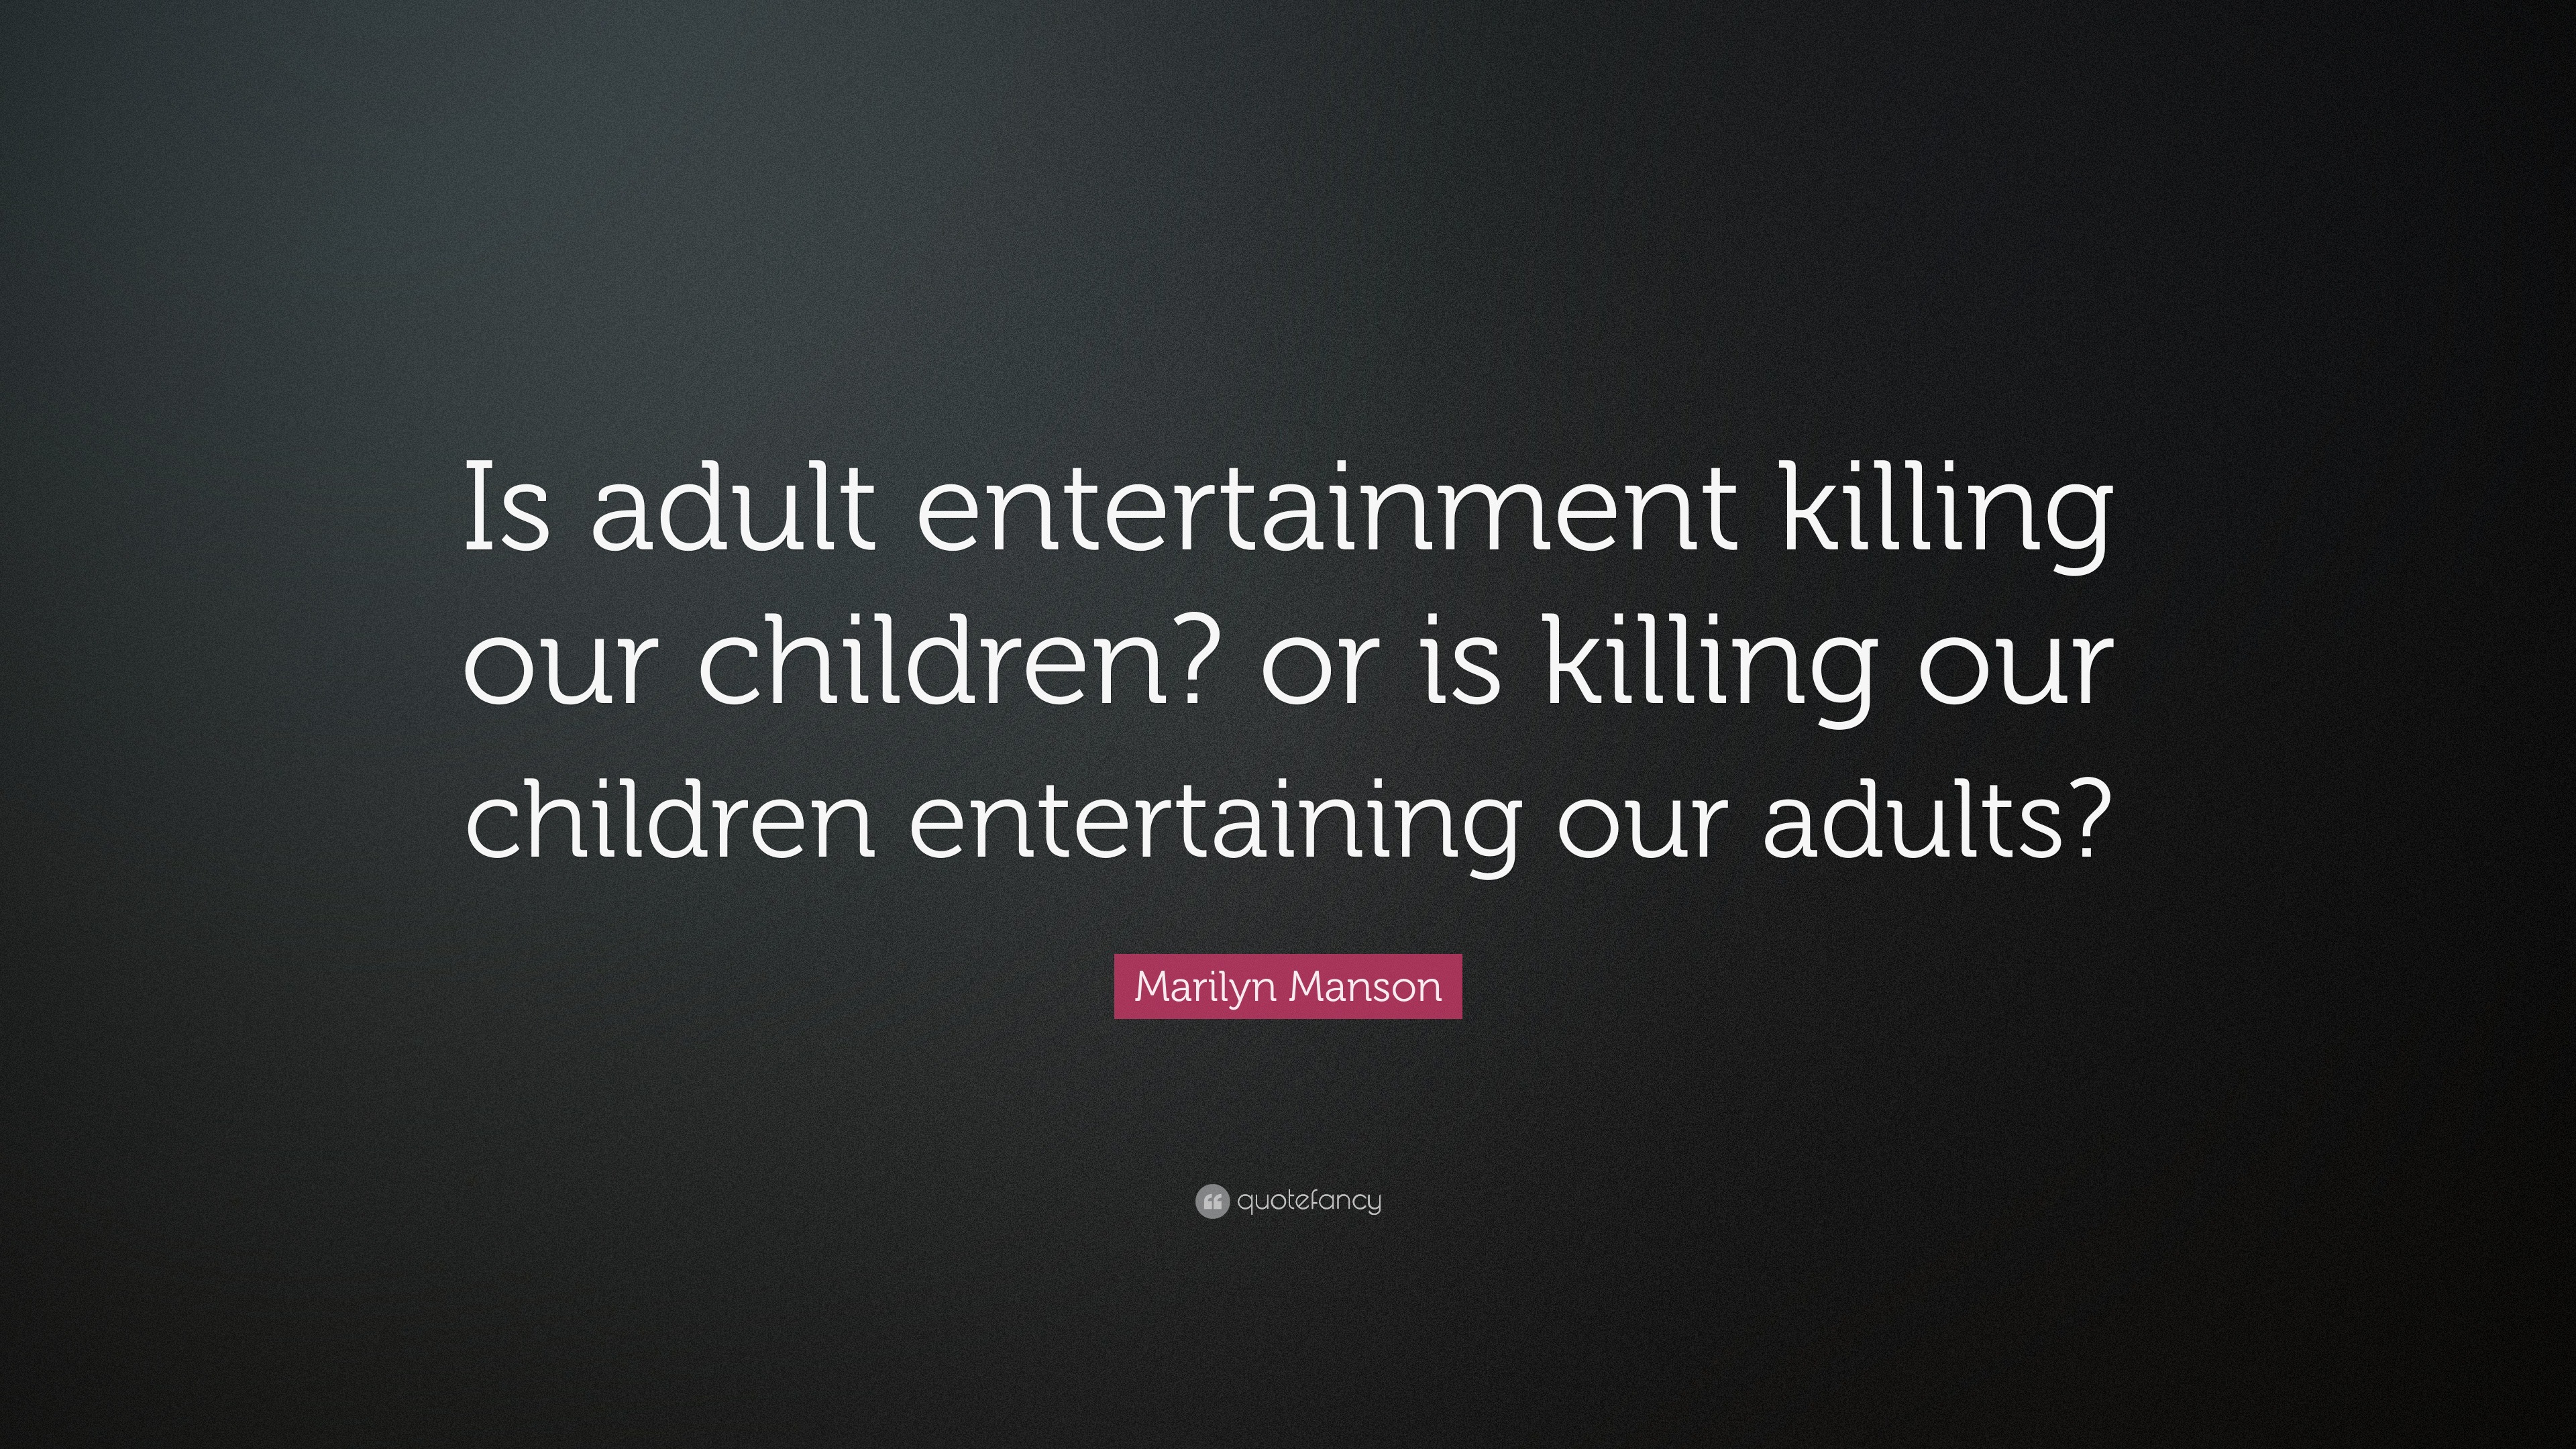 Marilyn Manson Quote Is Adult Entertainment Killing Our Children Or Is Killing Our Children Entertaining Our